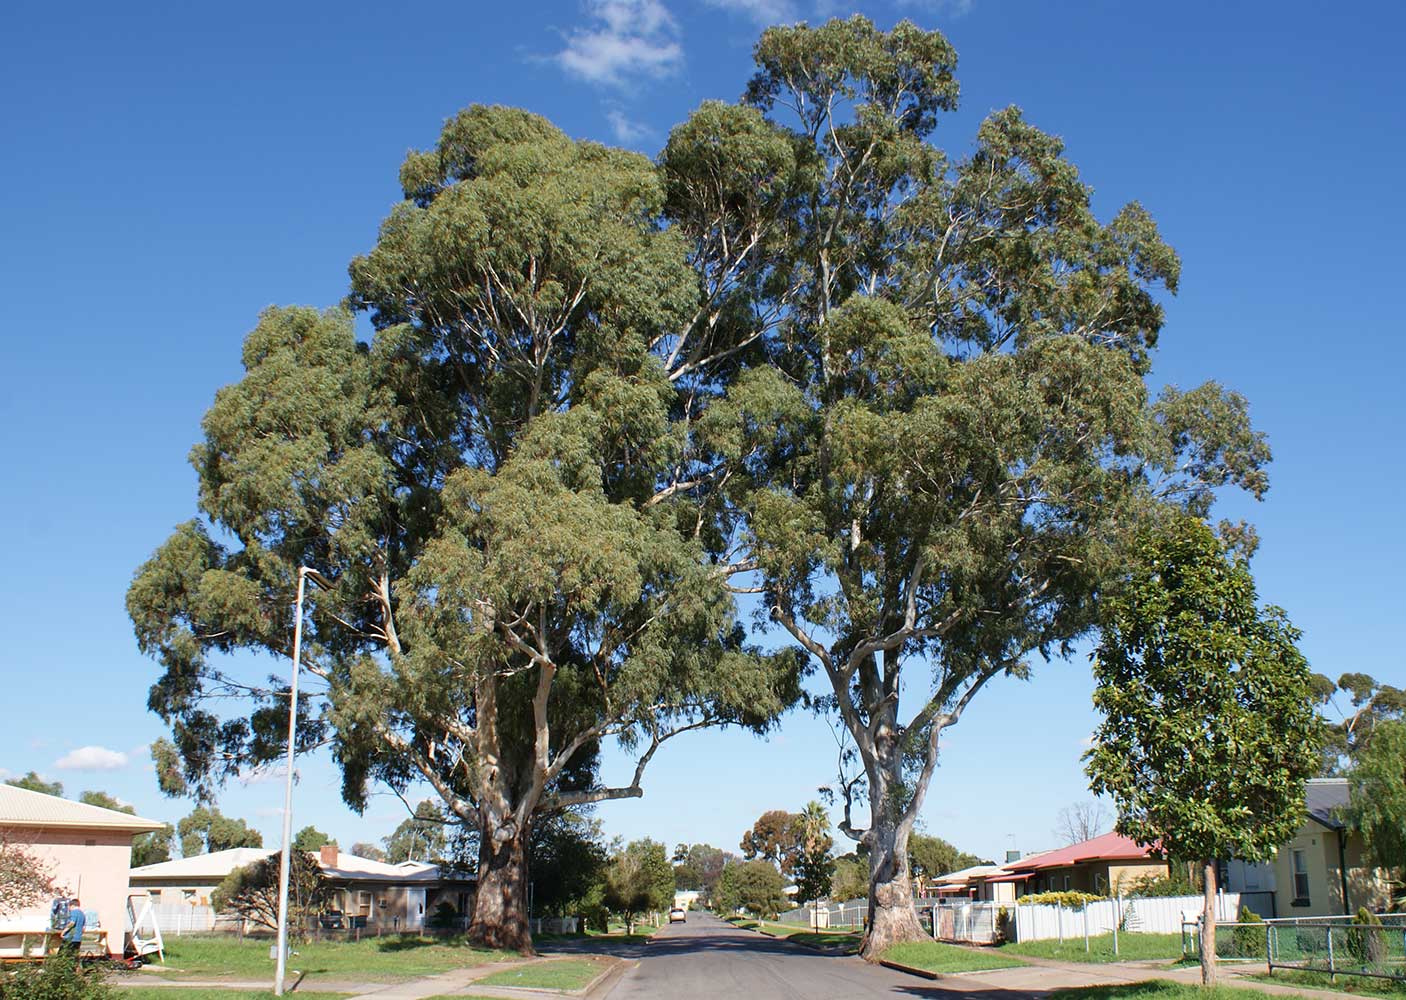 Two giant gum trees growing on either side of a residential street